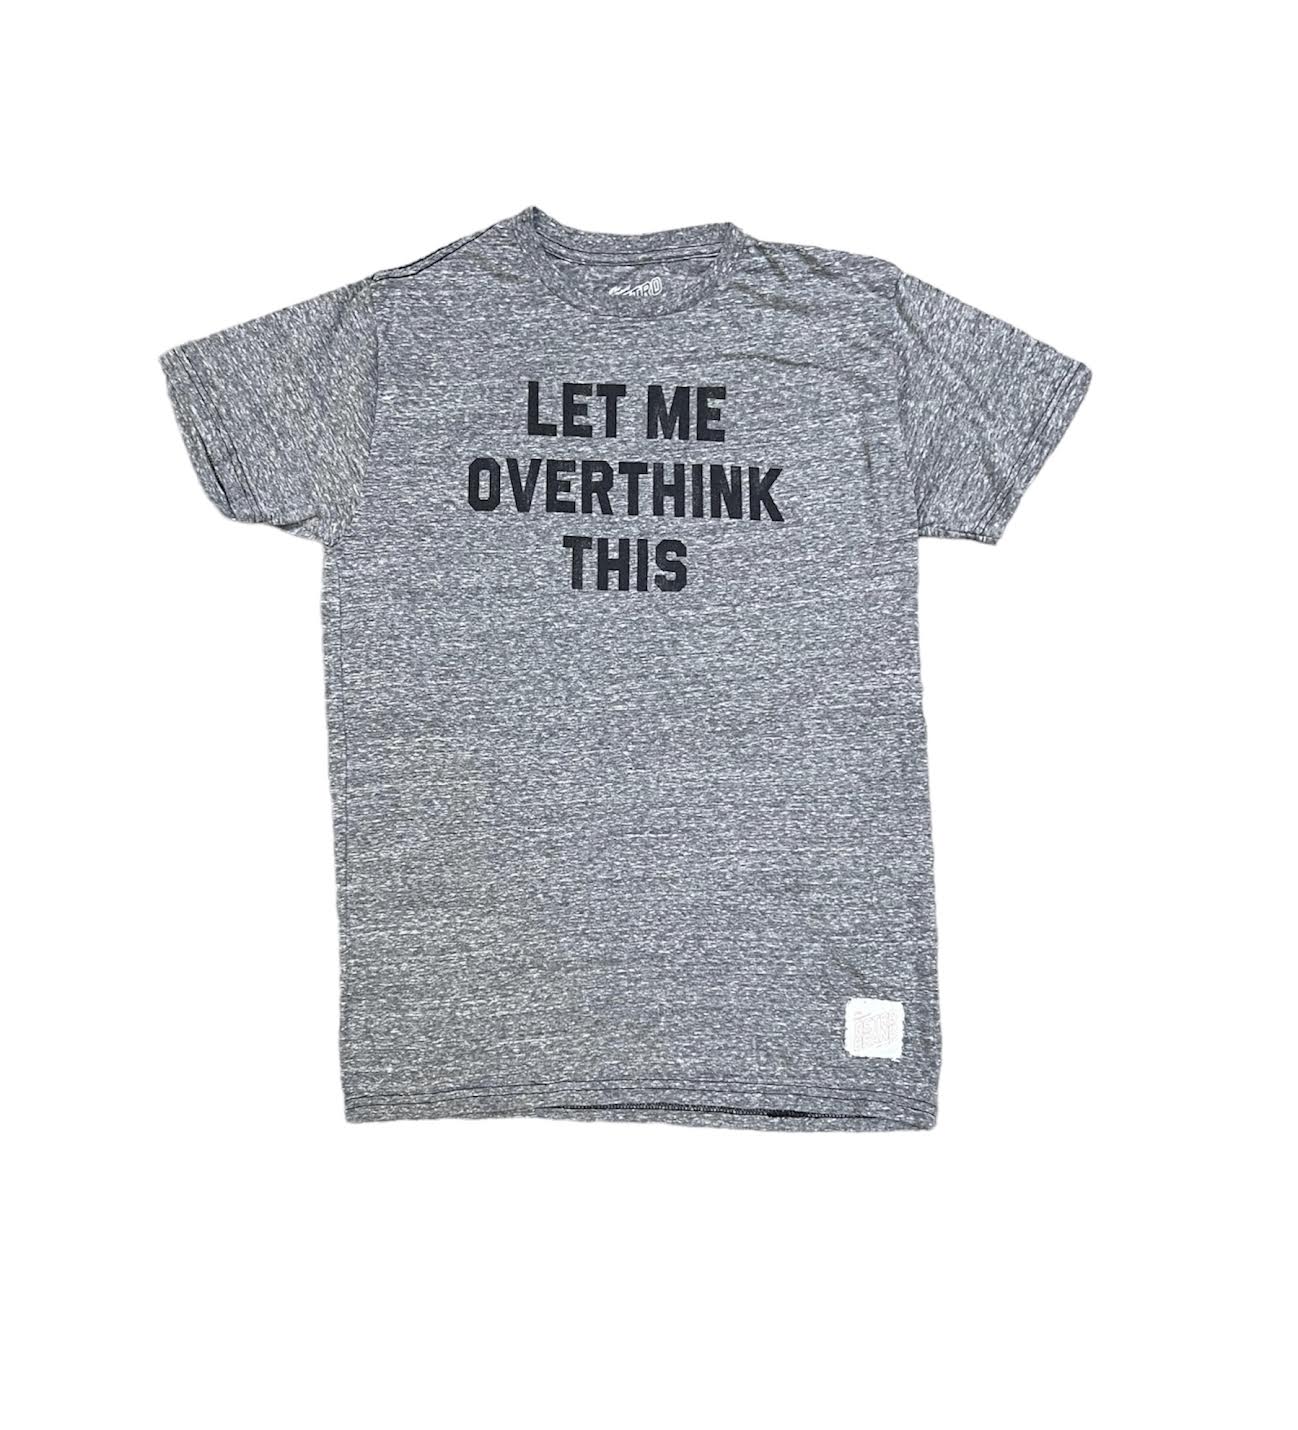 MENS LET ME OVERTHINK THIS T-SHIRT